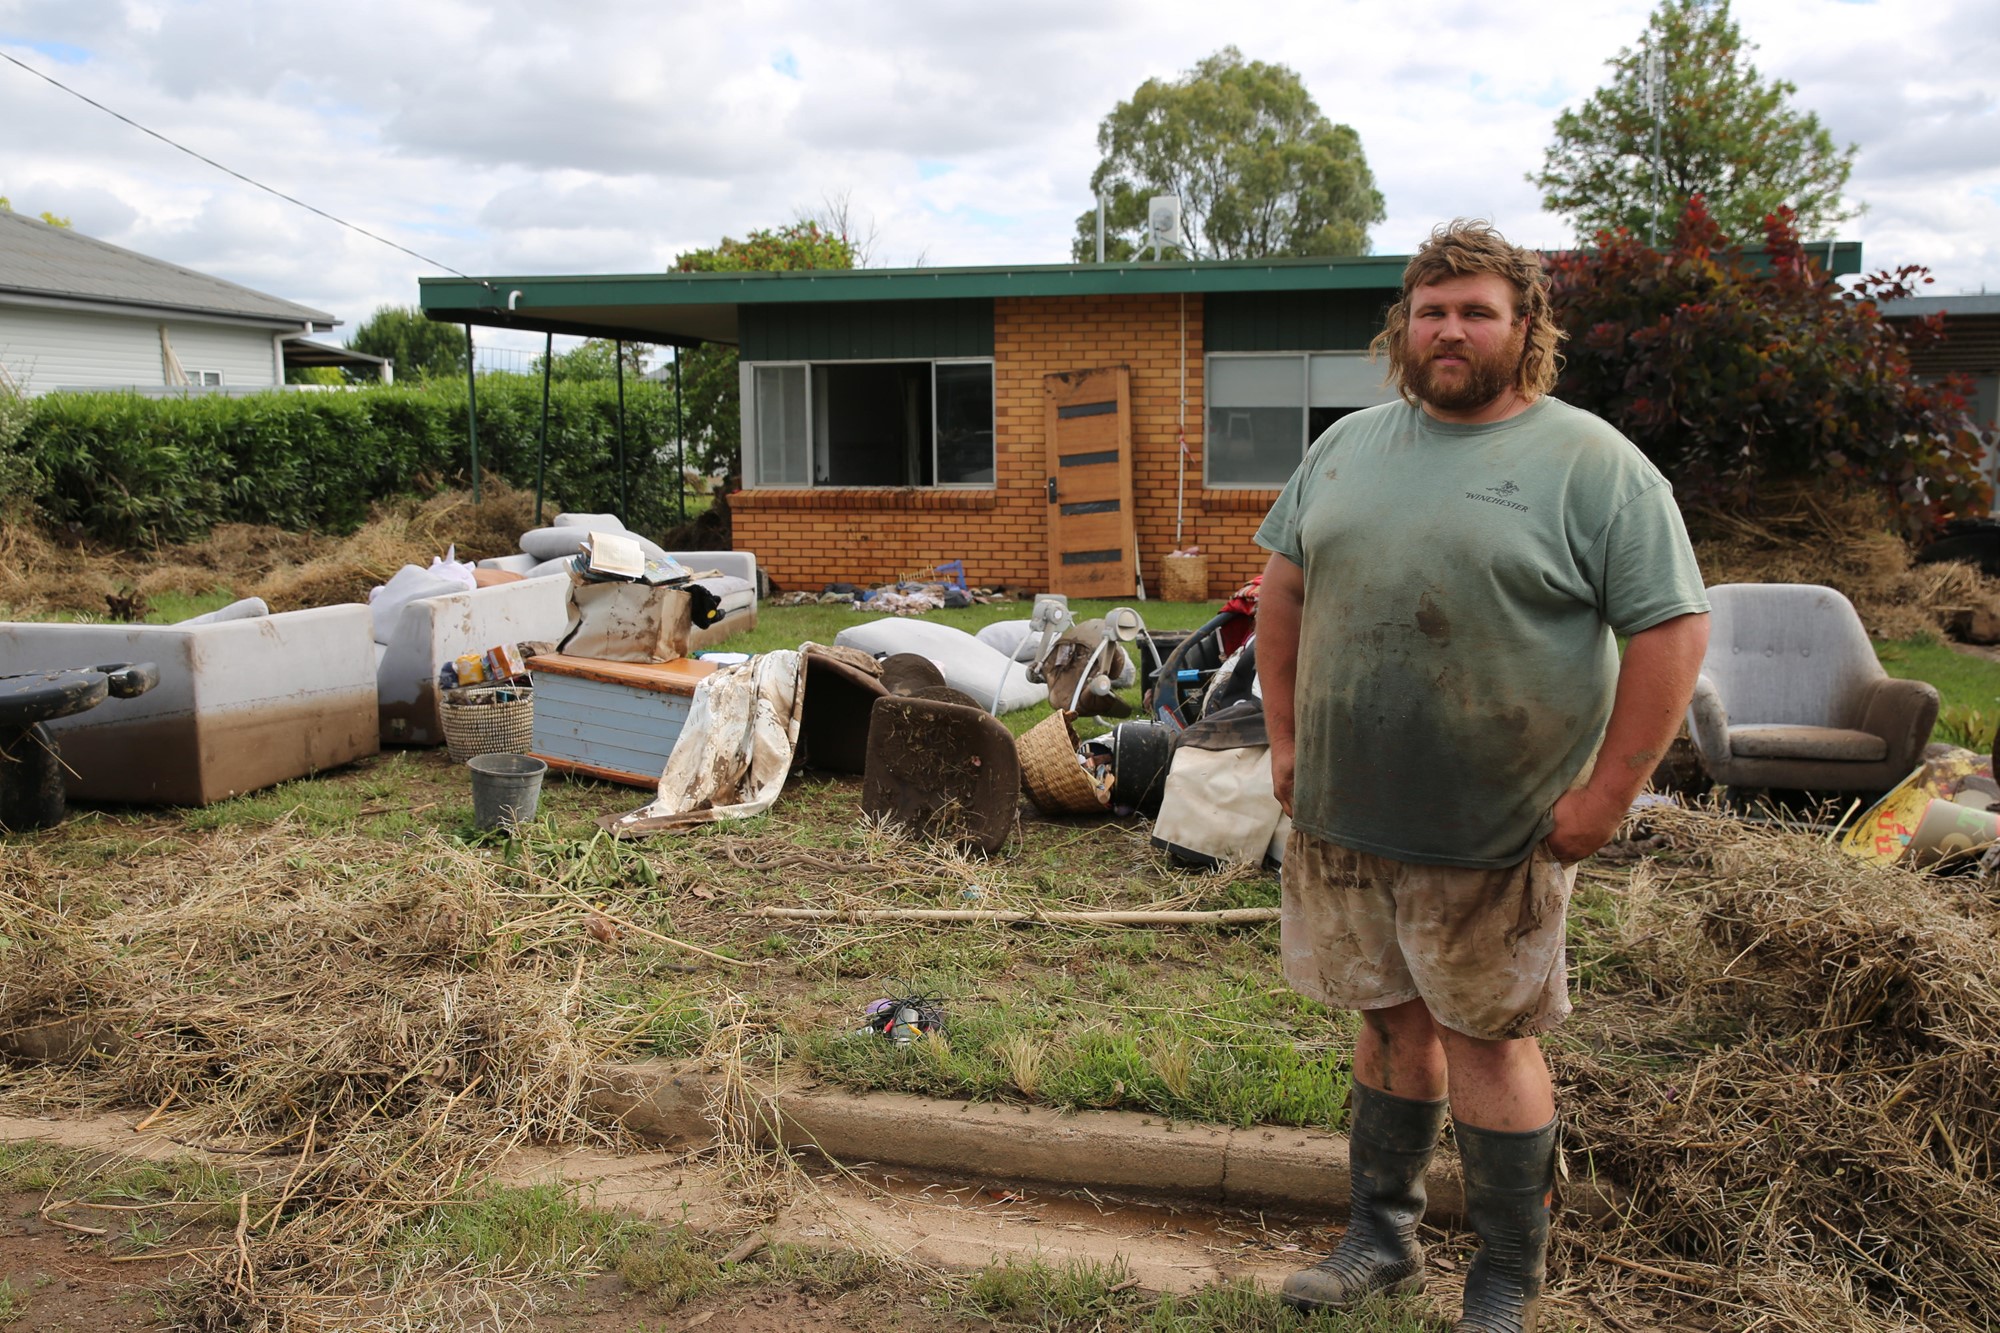 Blake stands outside his home with his ruined furniture strewn across the front lawn.